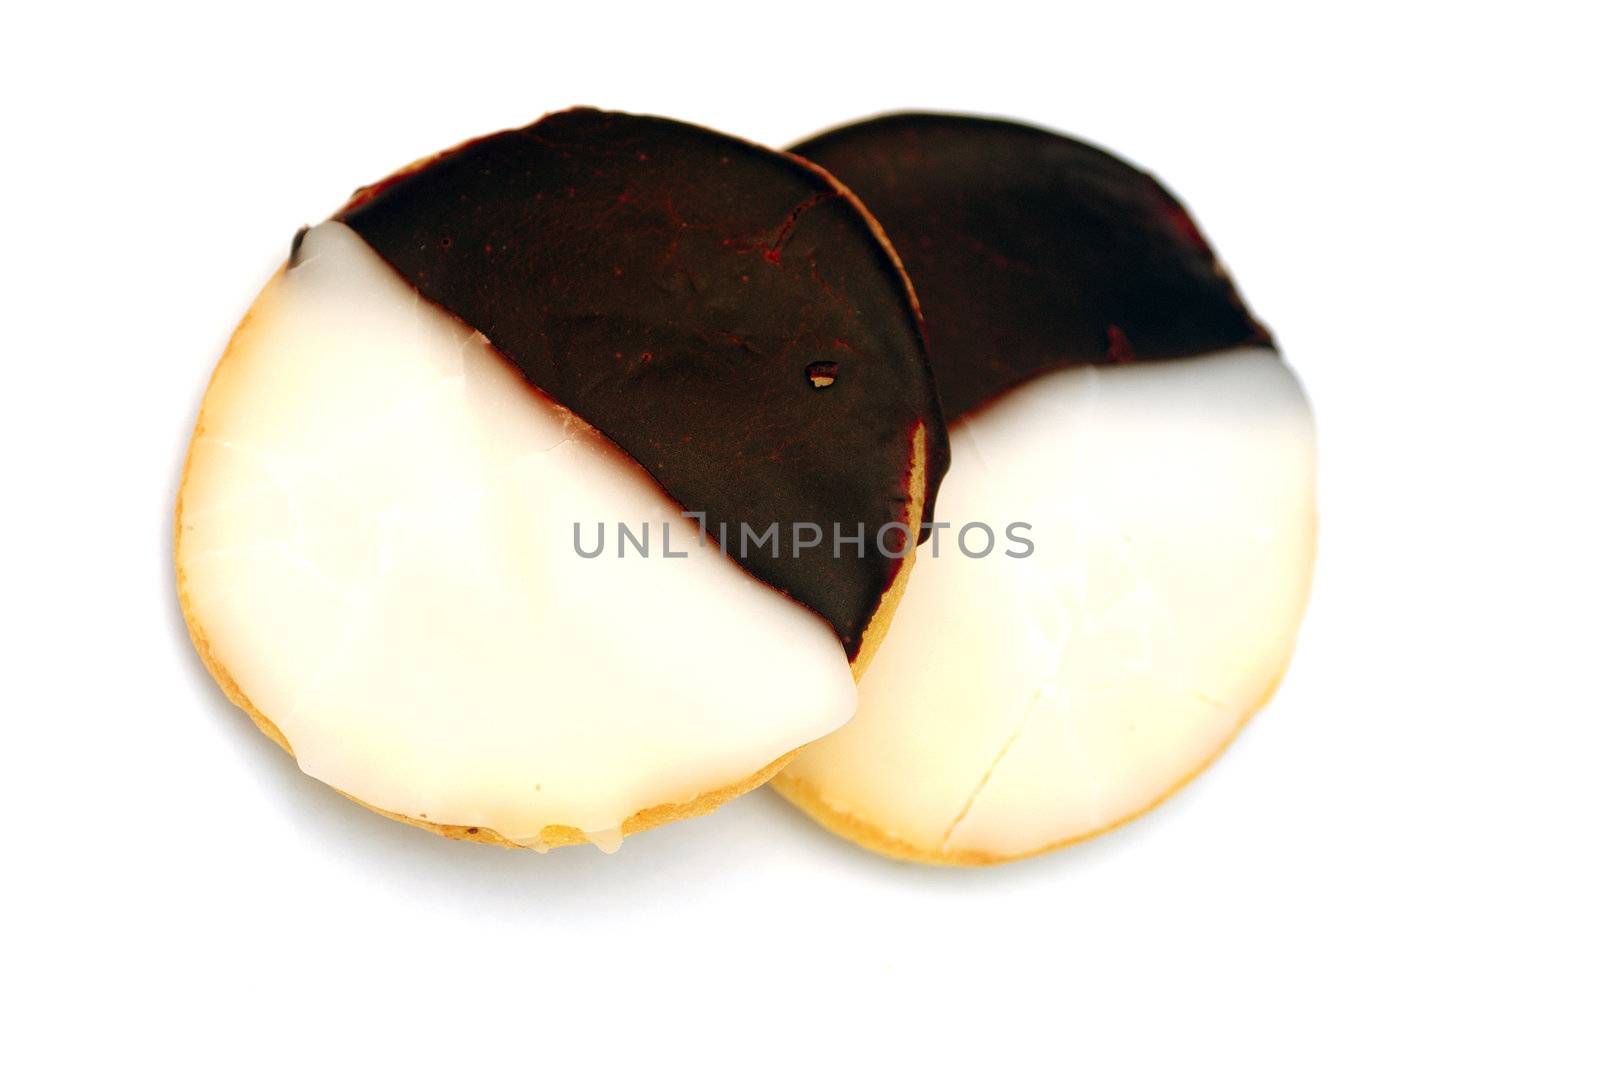 Two blak and white cookies isolated on a white back ground